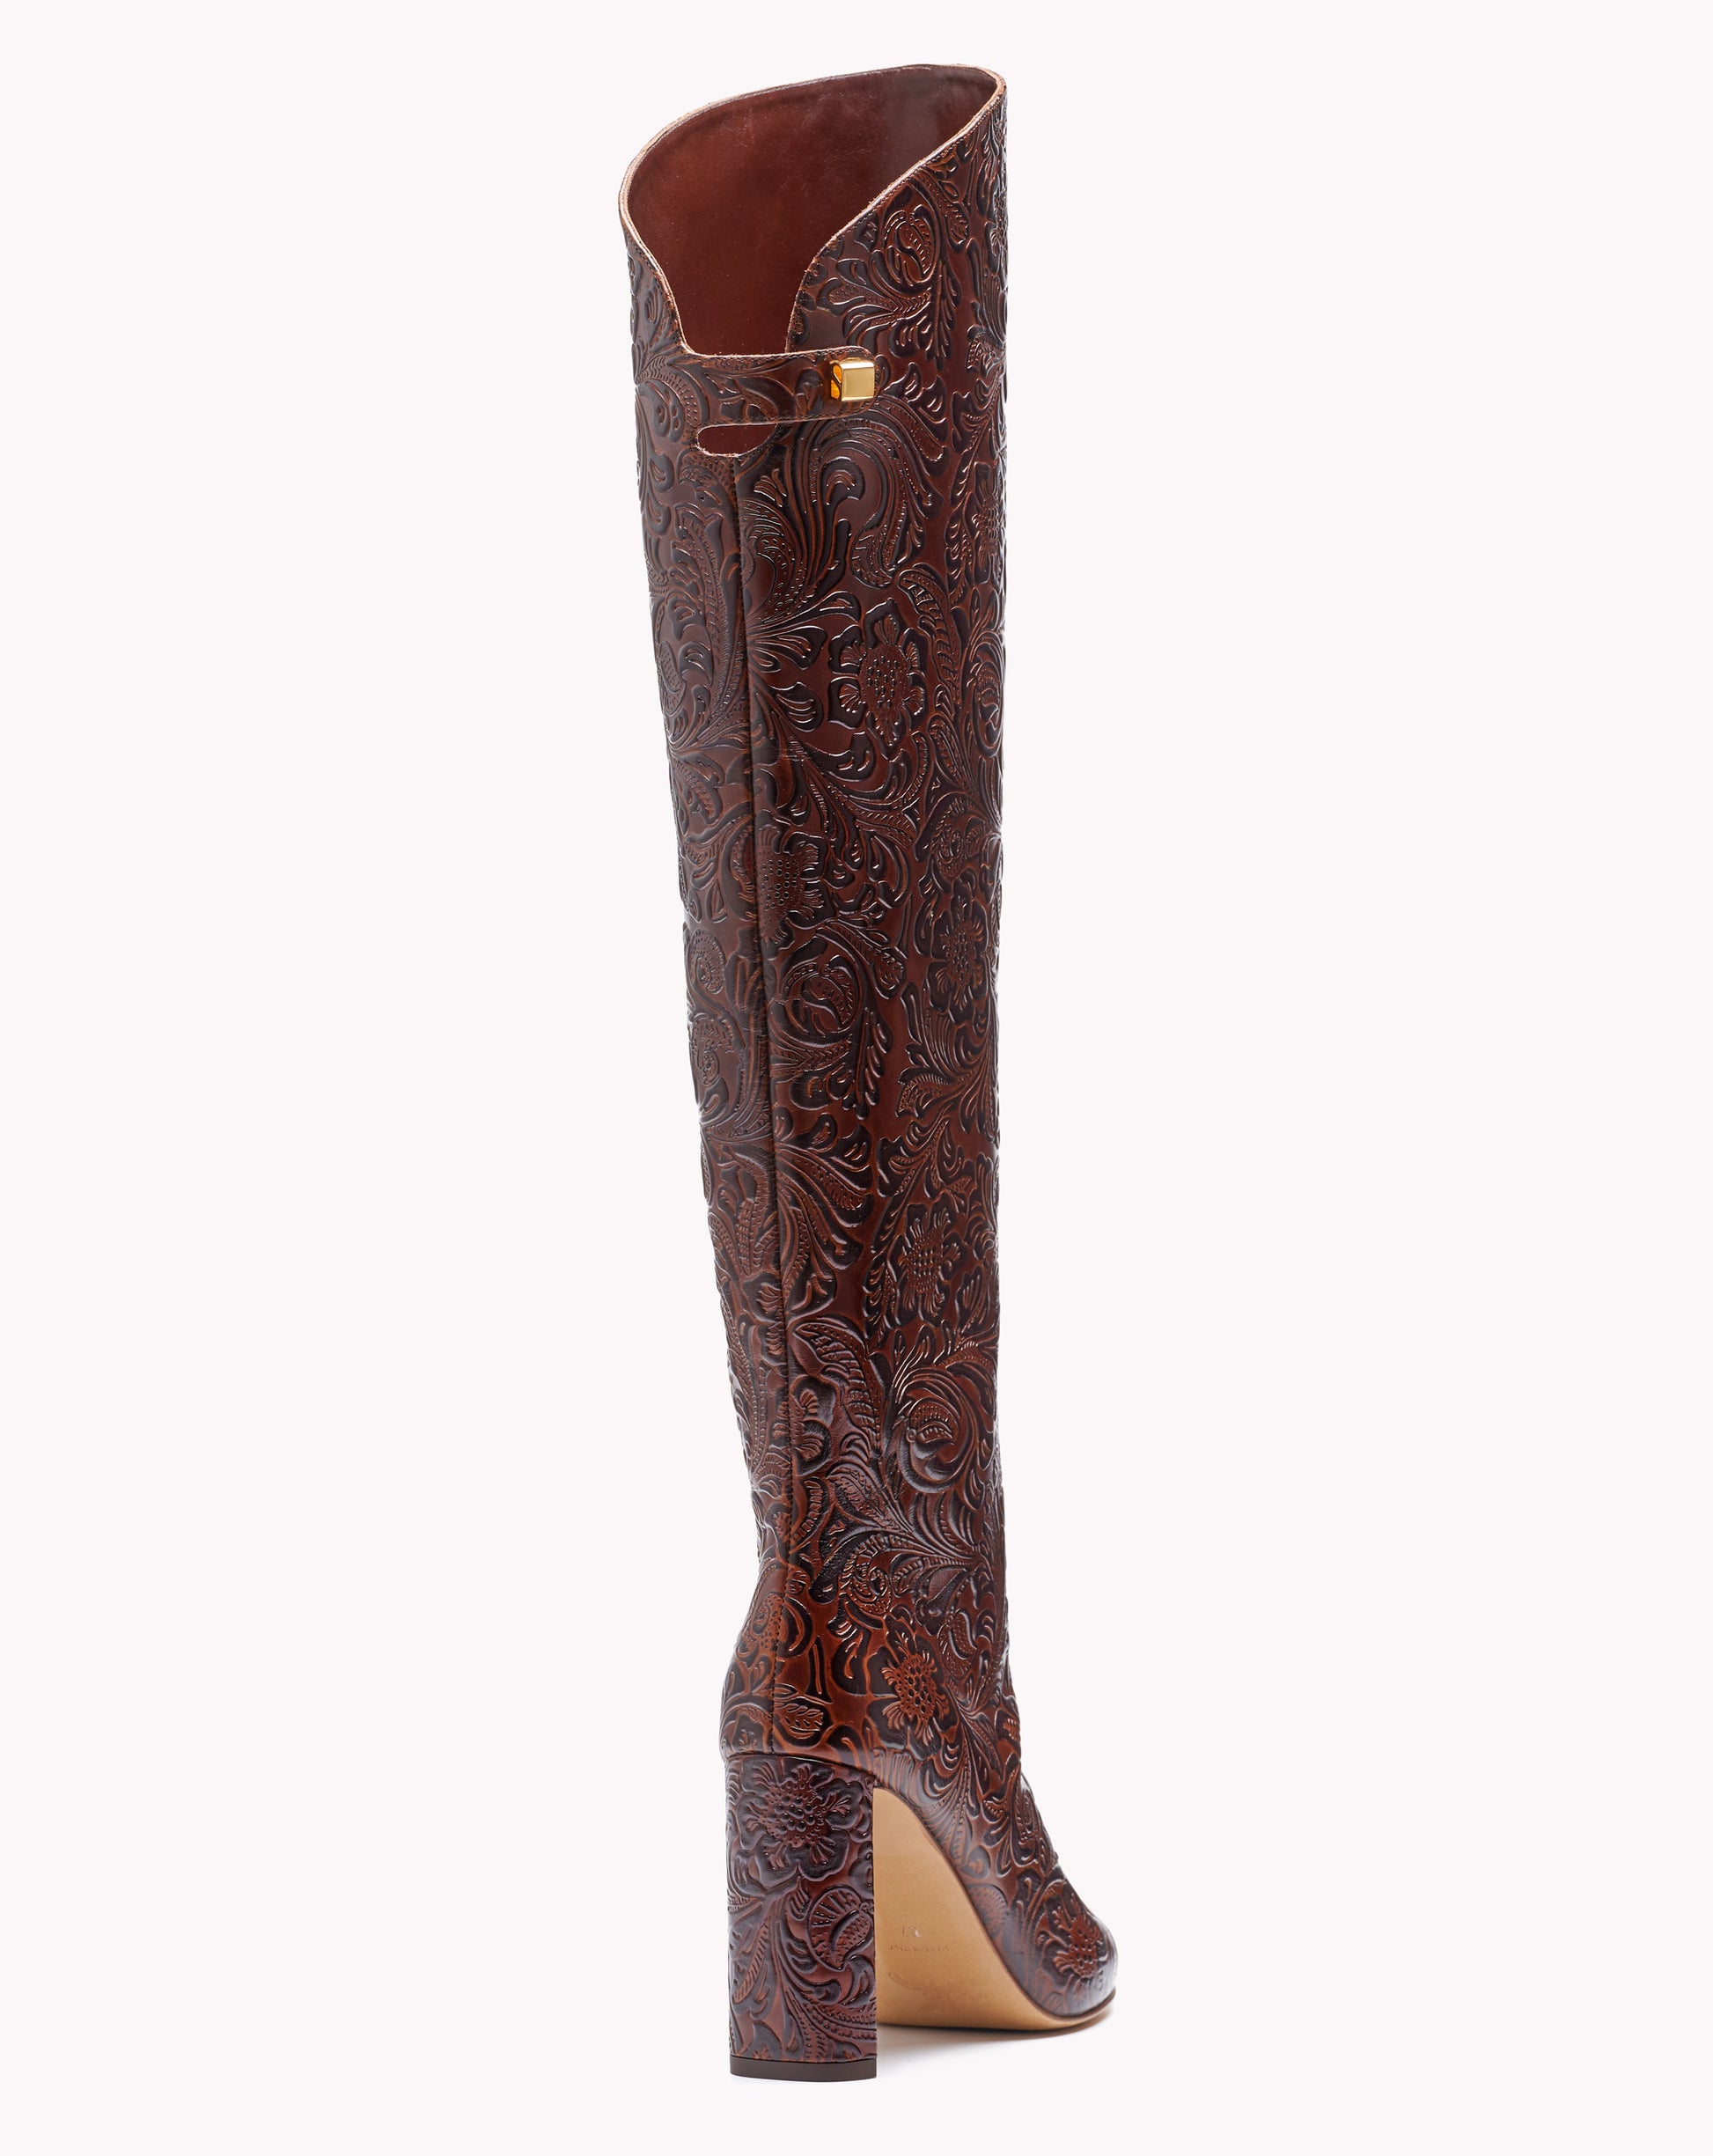 original and trendy designer boots with brown textured leather skorpios